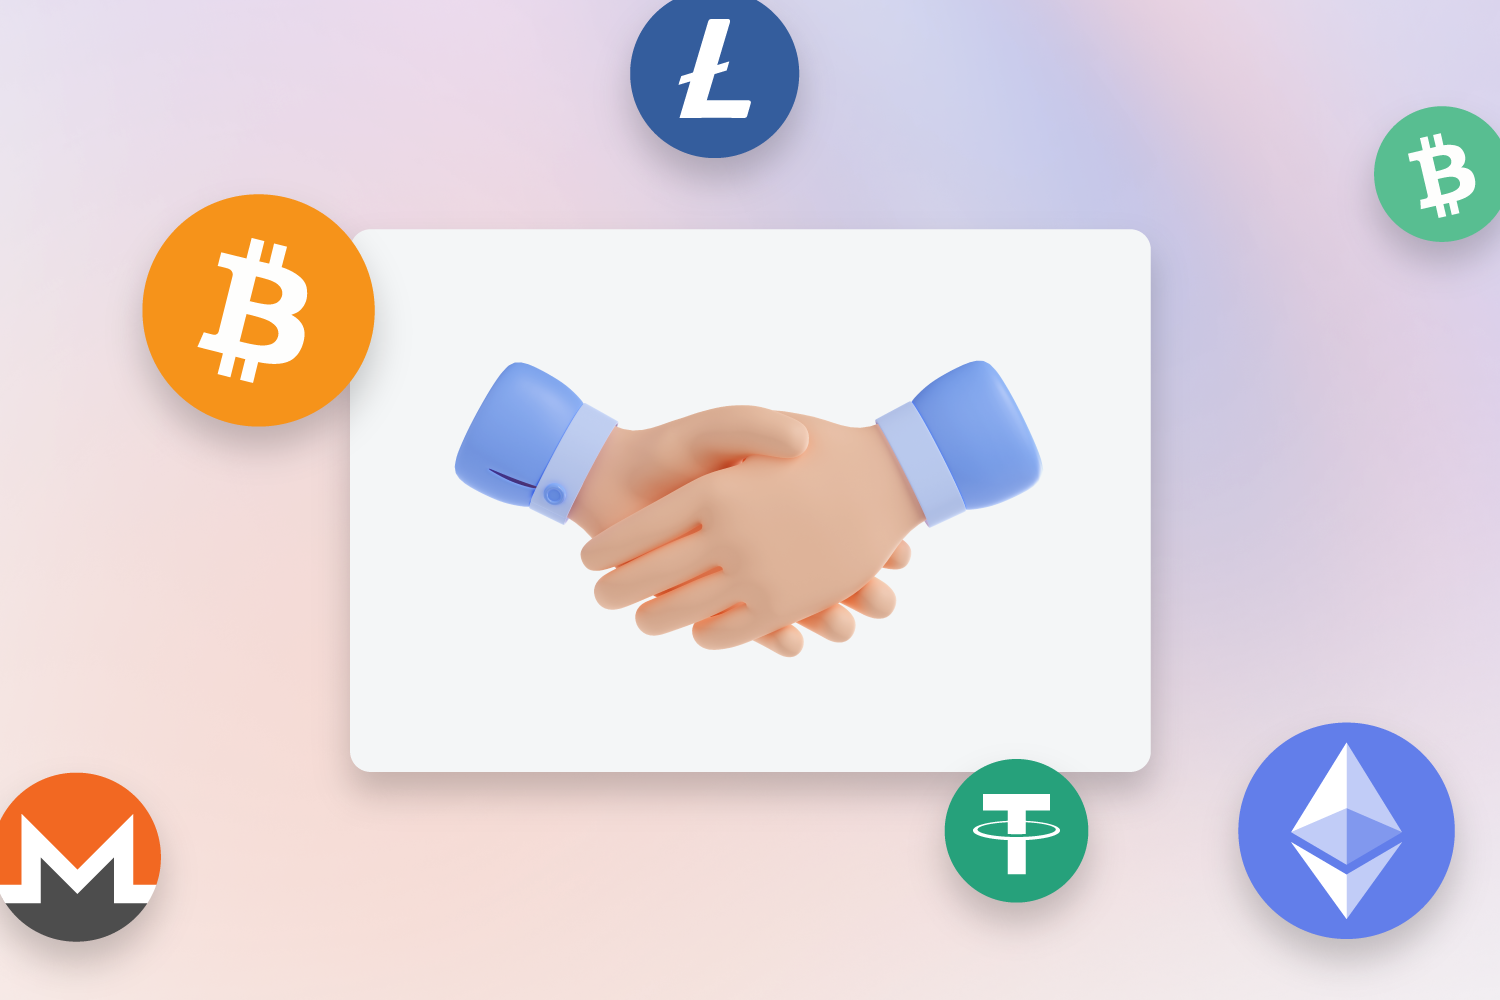 How partnerships between cryptocurrency platforms could improve the market